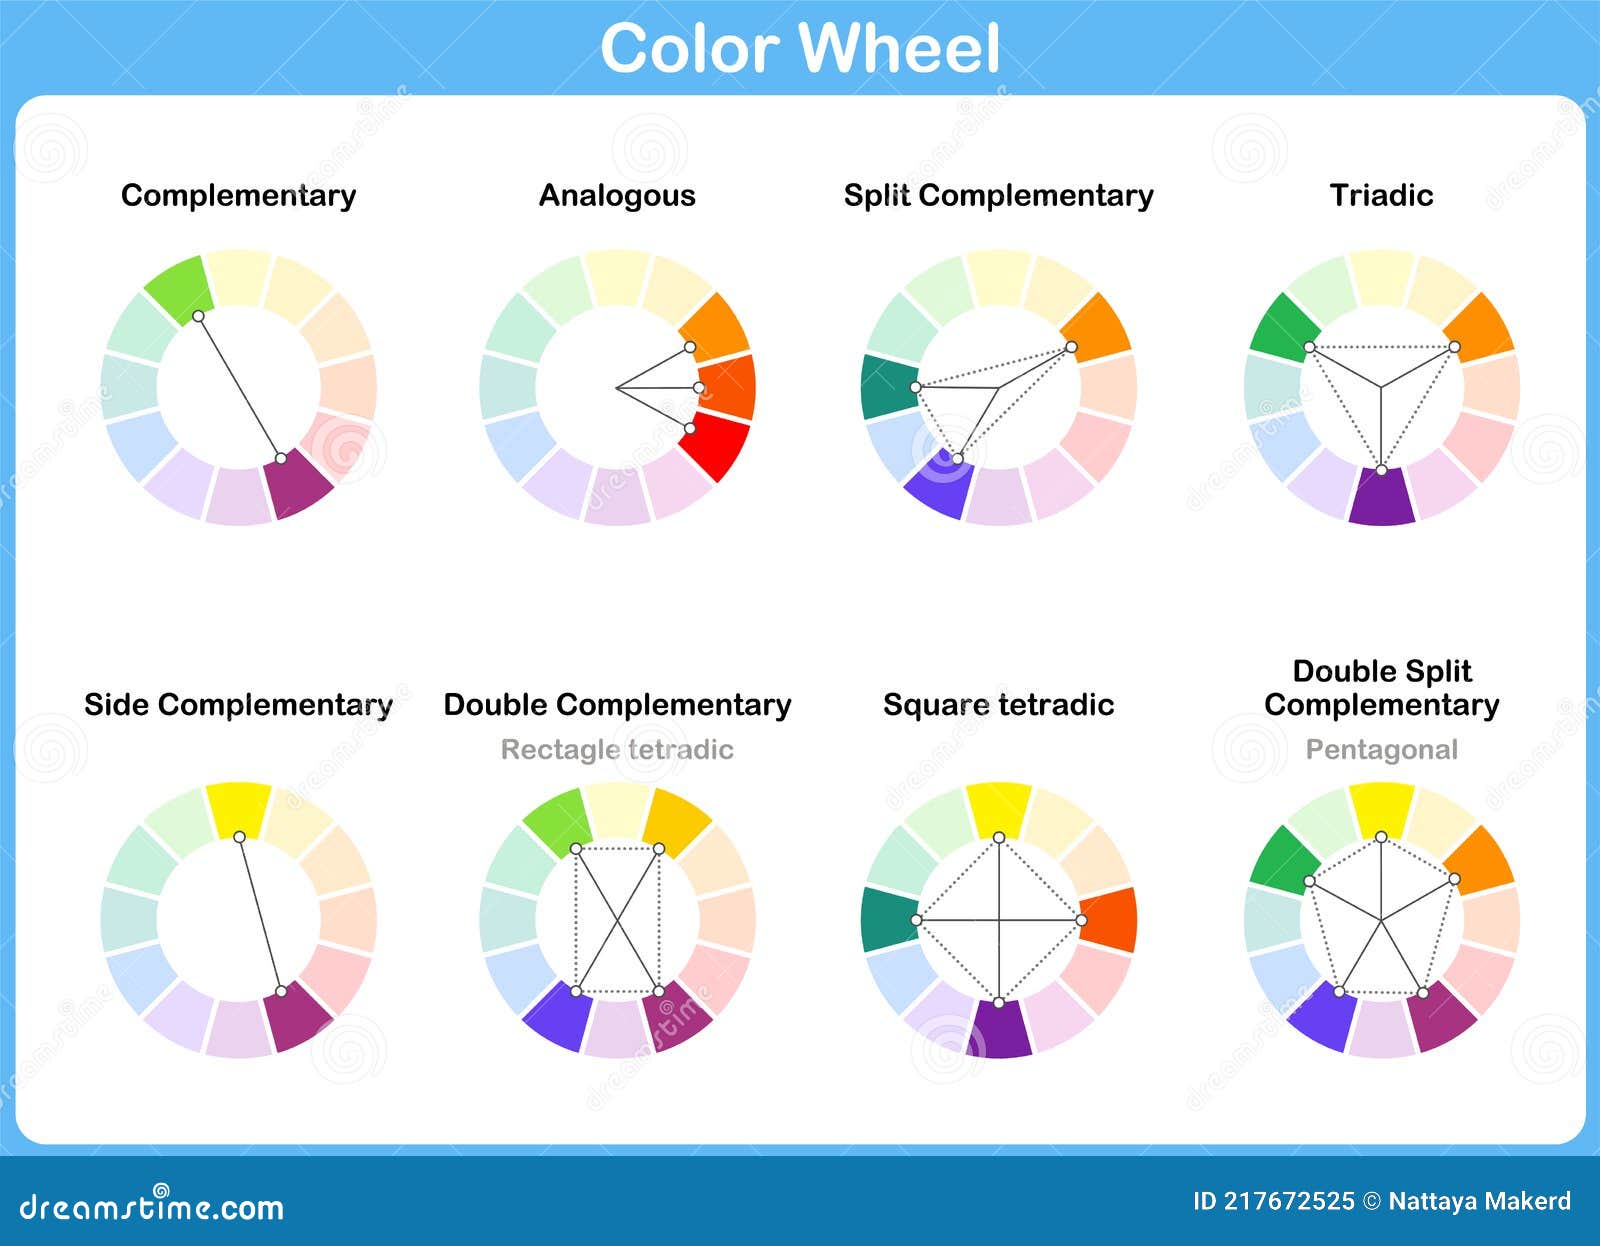 color wheel, color schemes -  types of color complementary schemes